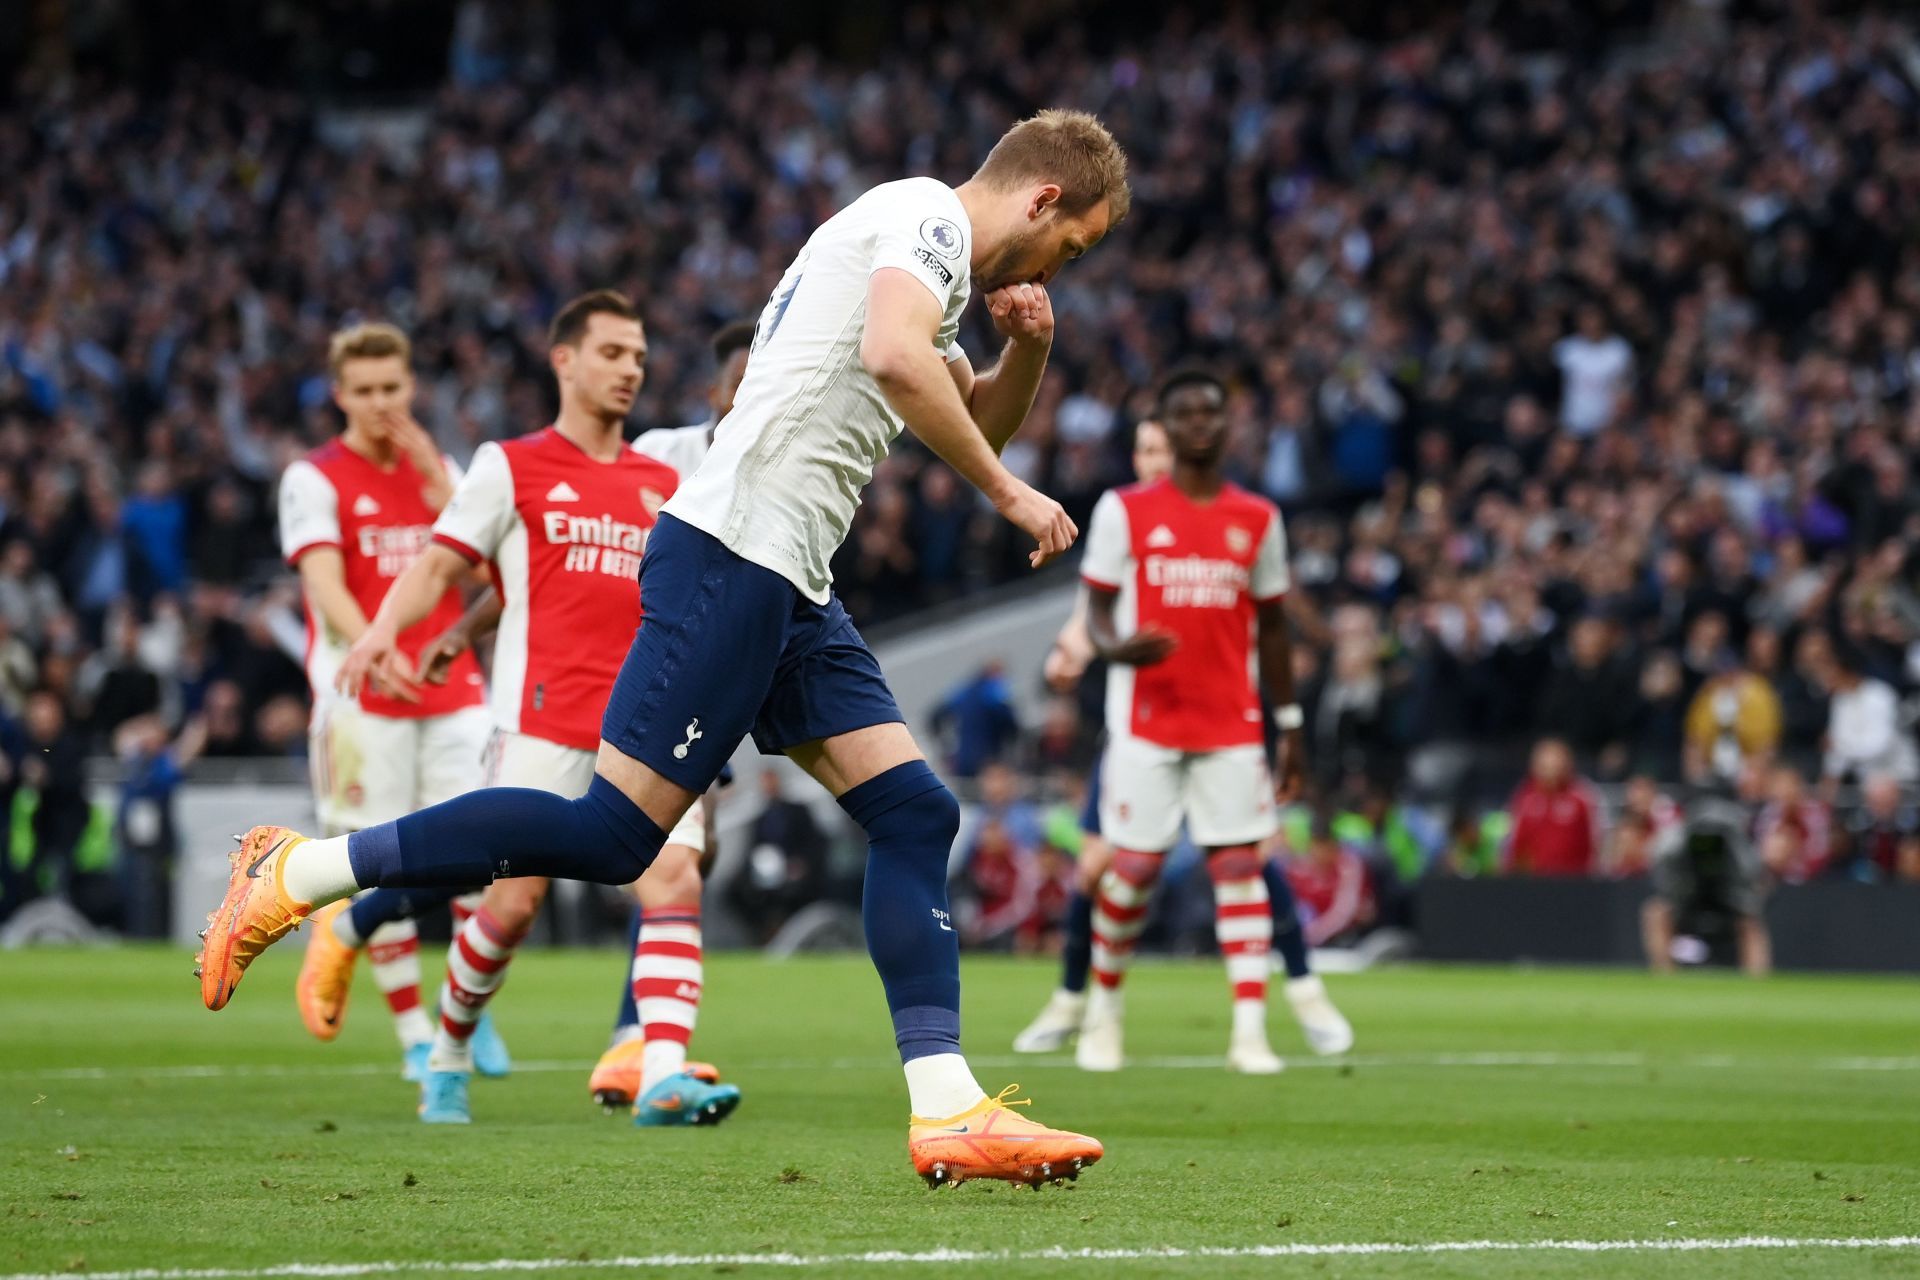 The Gunners need to pick themselves up after defeat to Tottenham